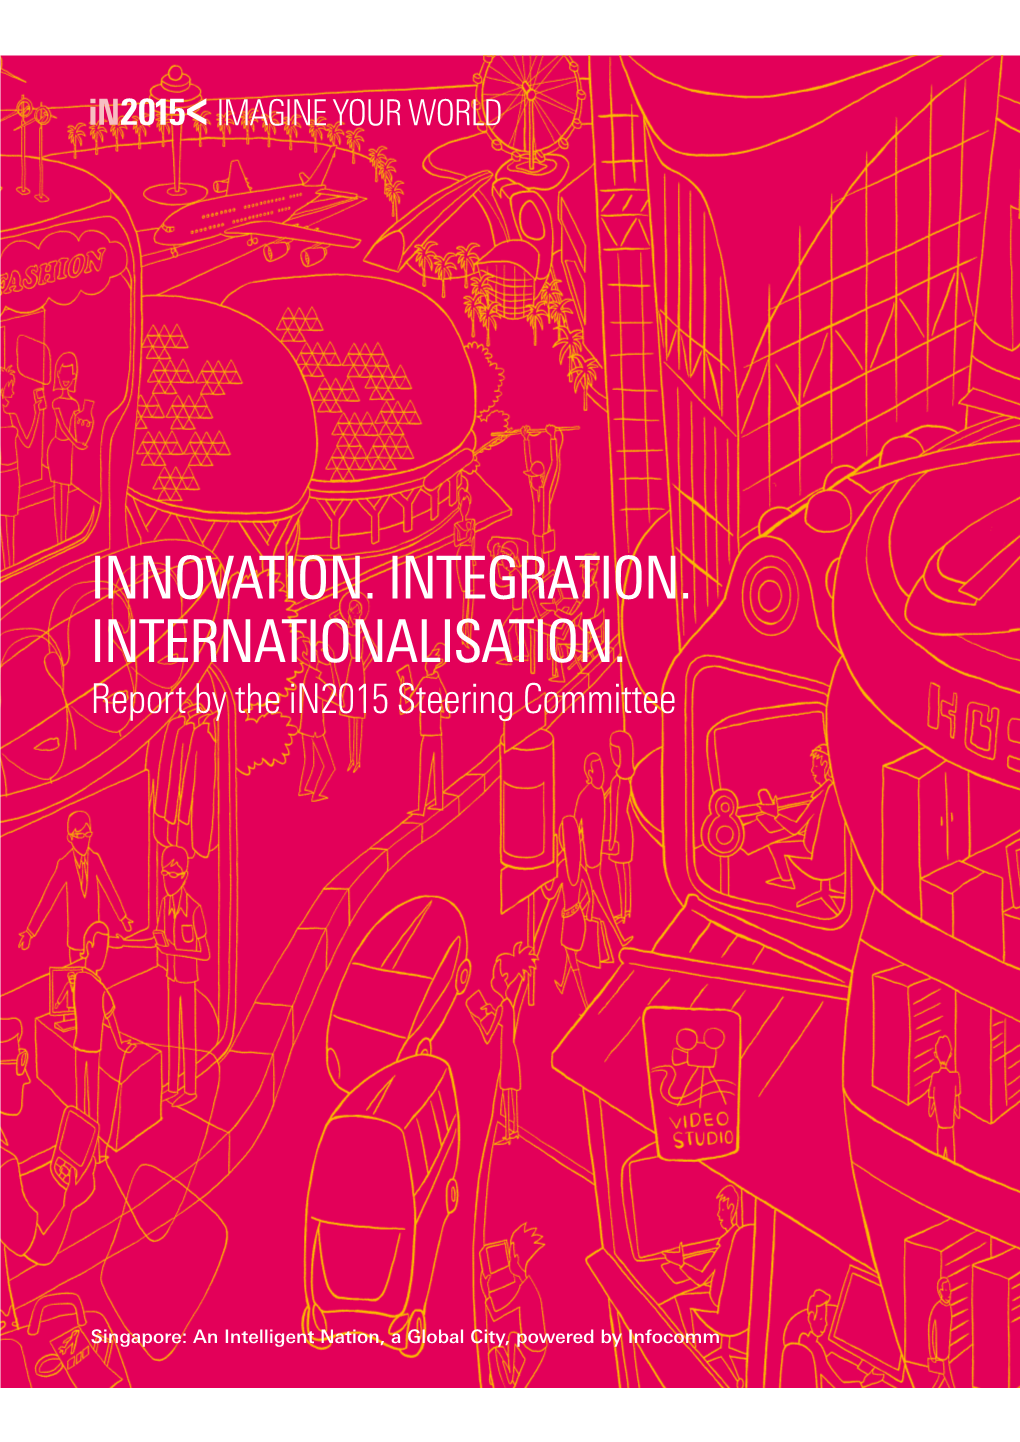 INNOVATION. INTEGRATION. INTERNATIONALISATION. Report by the In2015 Steering Committee